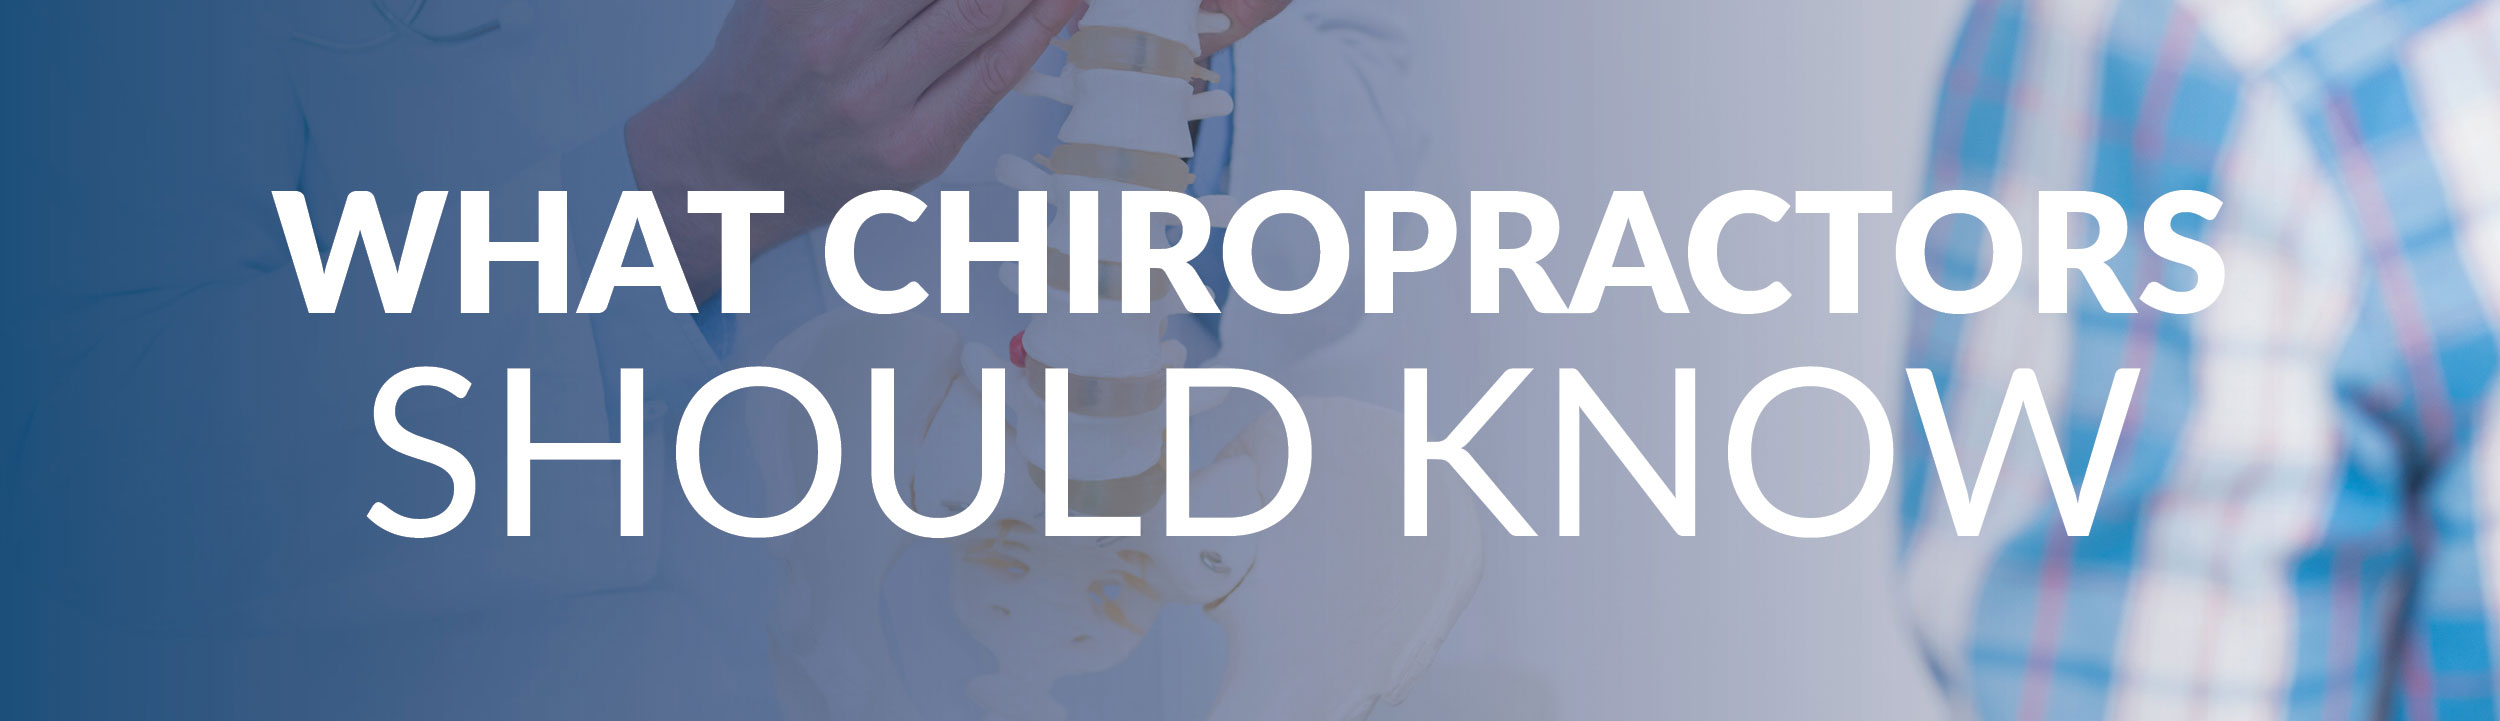 What Chiropracters should know